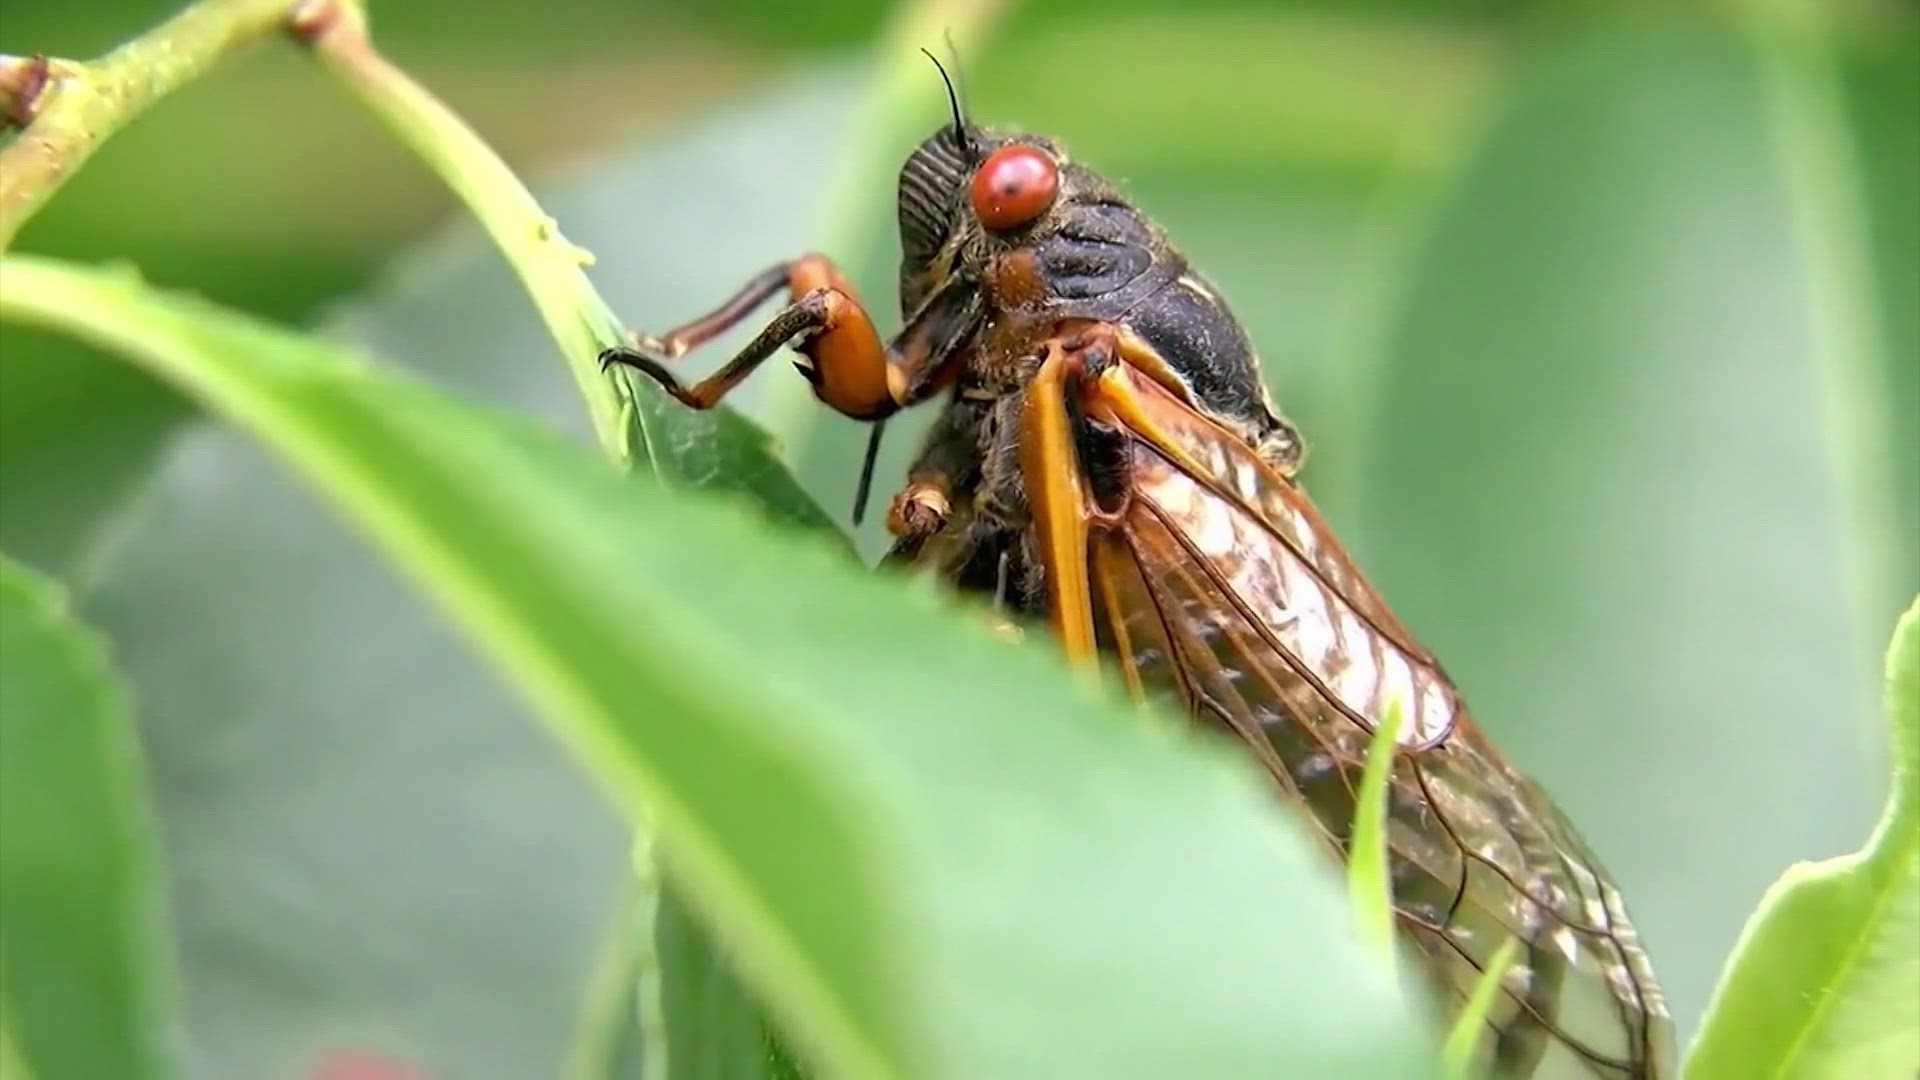 The wasps usually pop up wherever cicadas are around. And while they normally chase cicadas, they also can go after people.